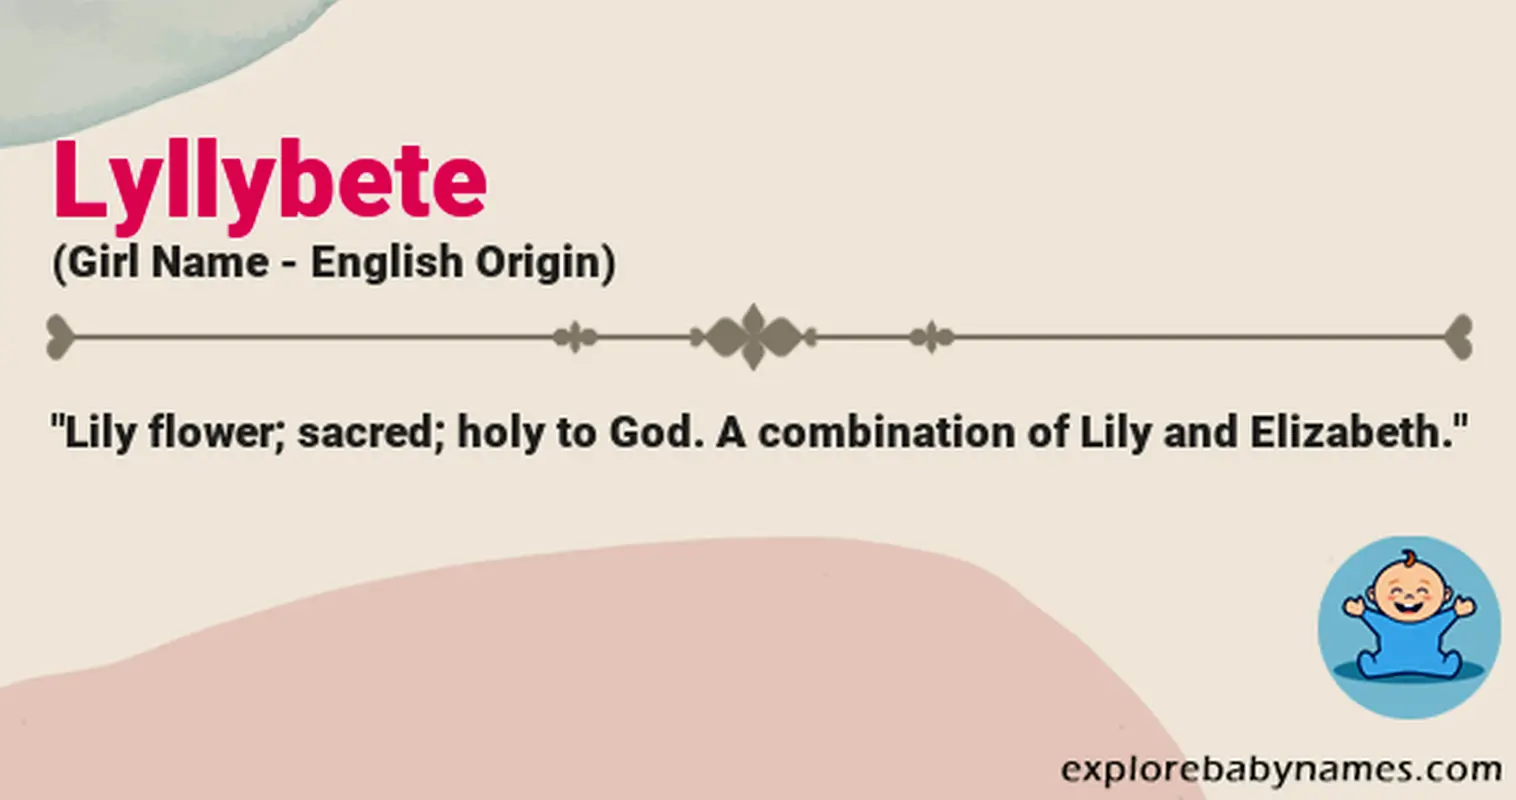 Meaning of Lyllybete